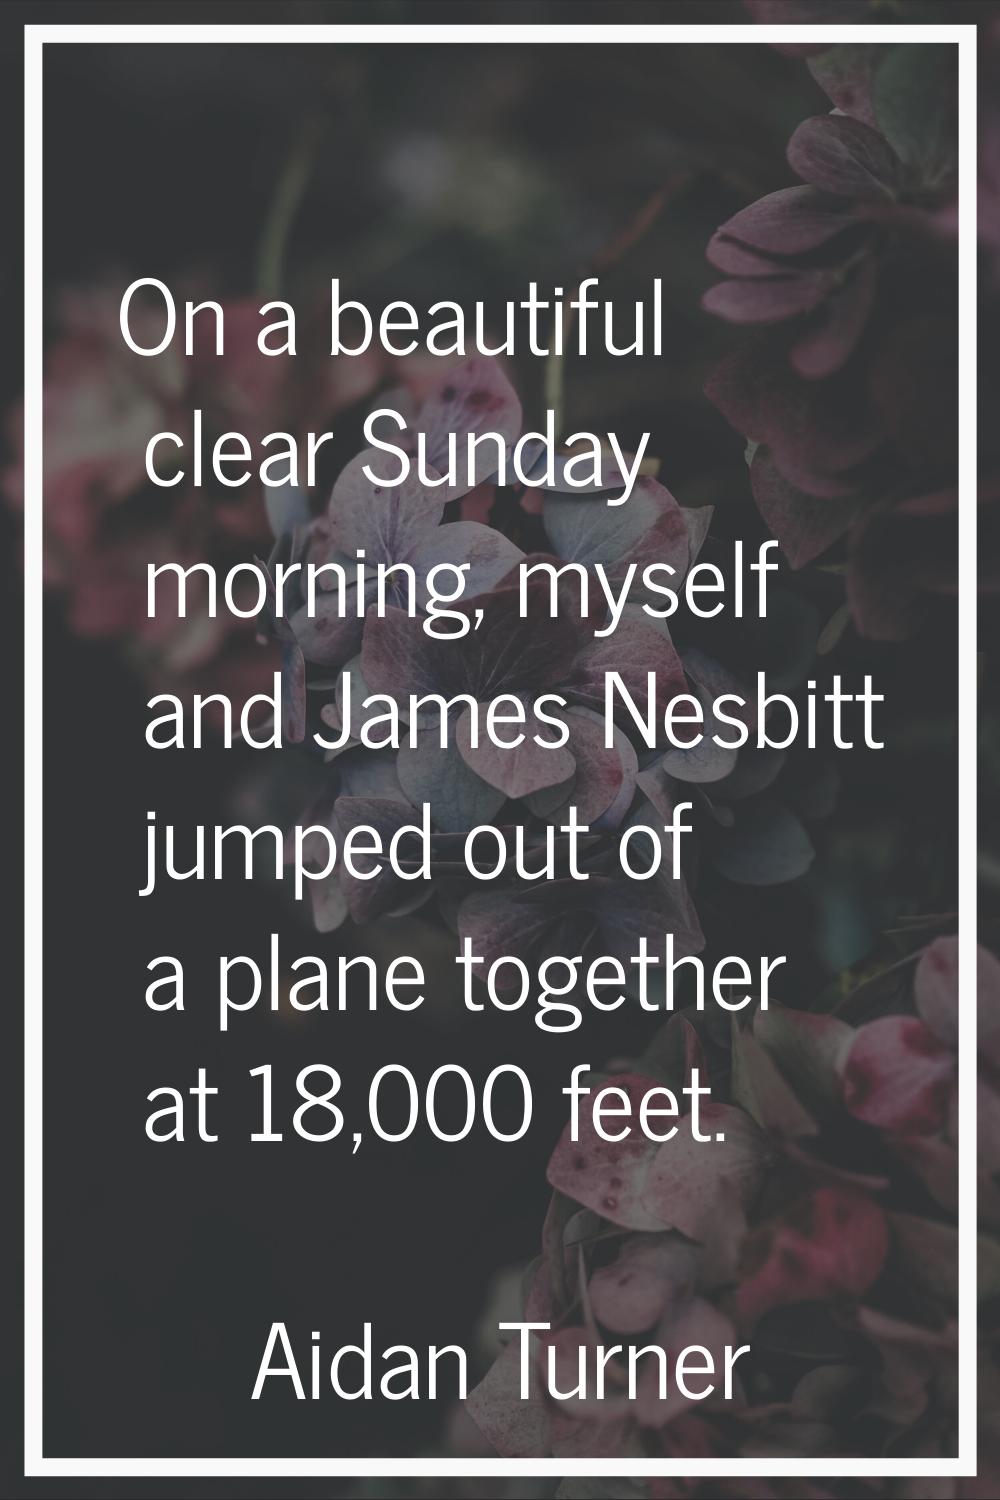 On a beautiful clear Sunday morning, myself and James Nesbitt jumped out of a plane together at 18,